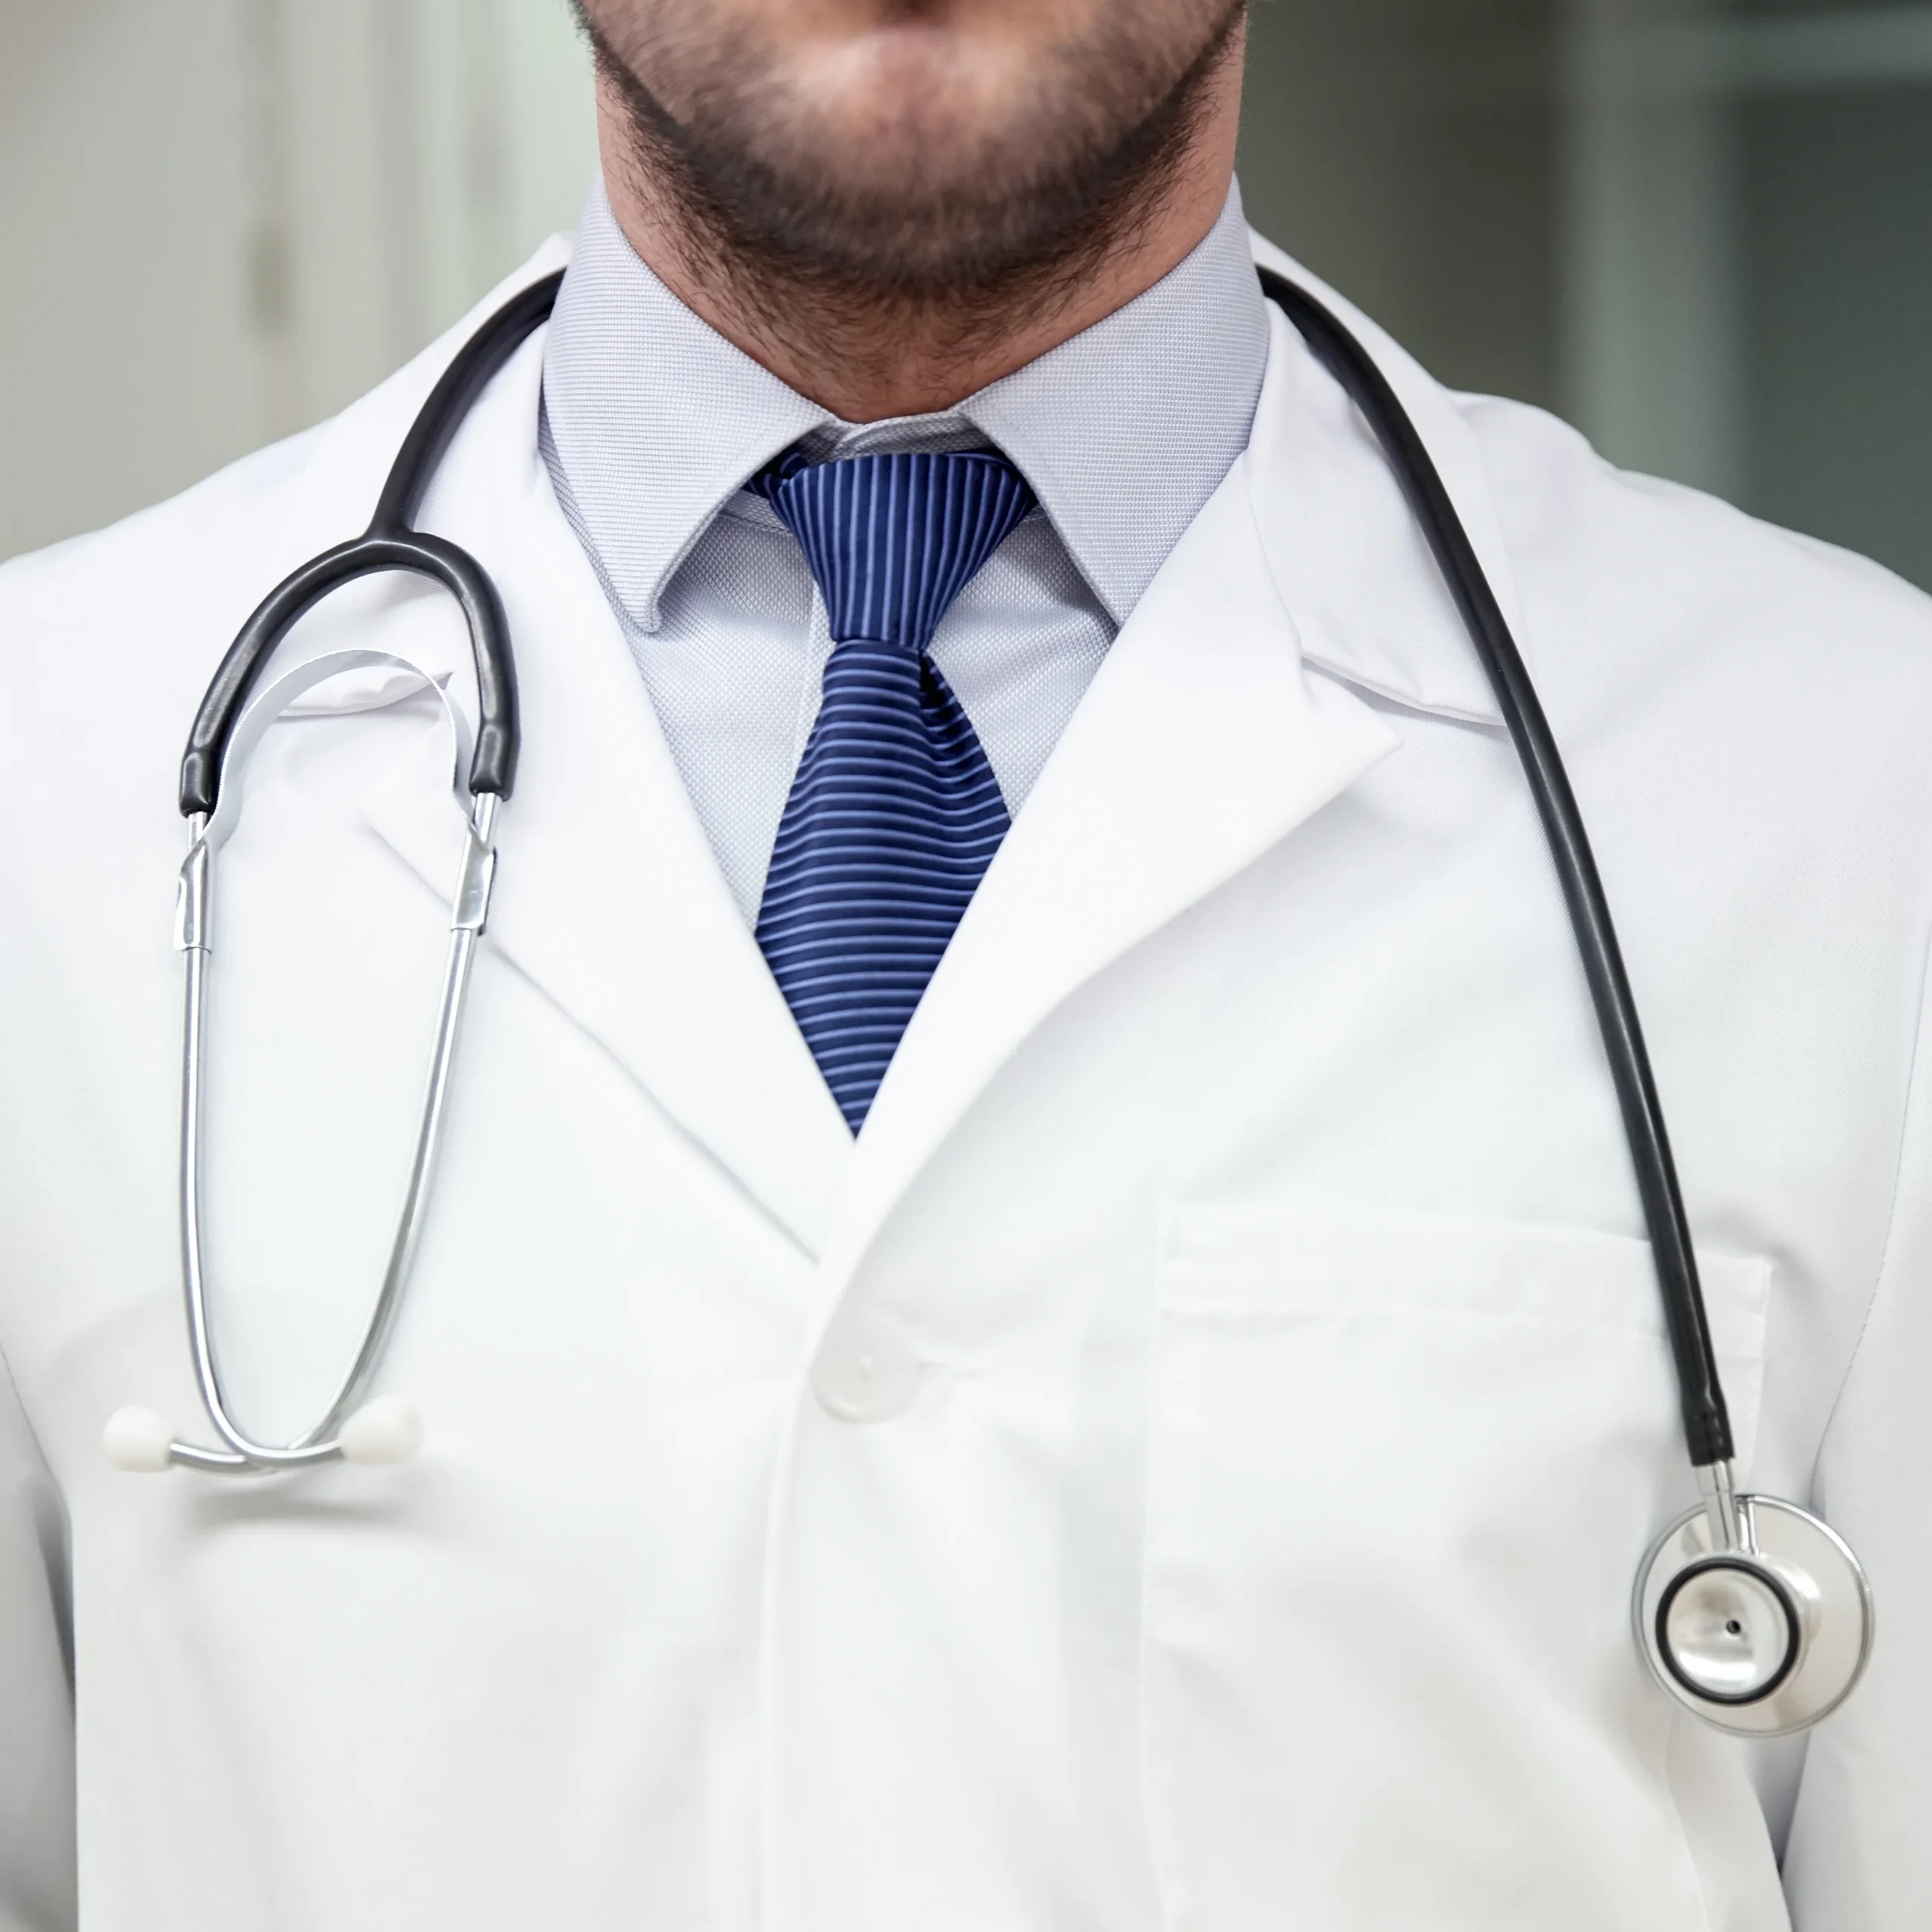 Image of a Doctor